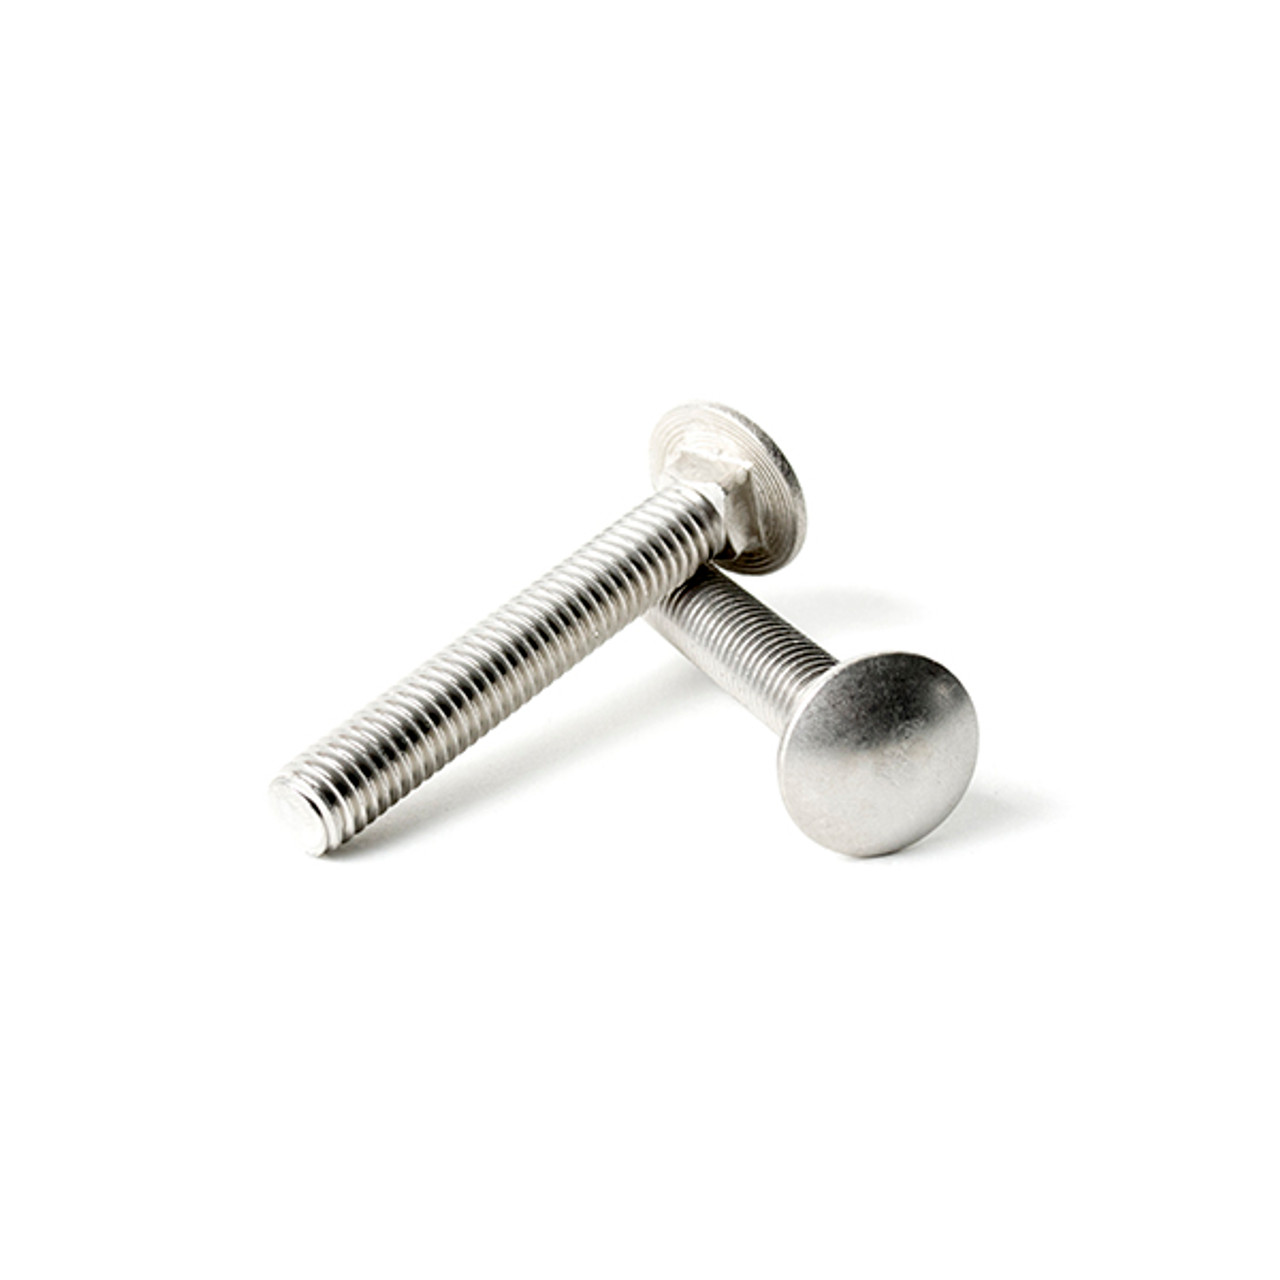 5/16-18 Carriage Bolts Stainless Steel All Lengths and Quantities in Listing 